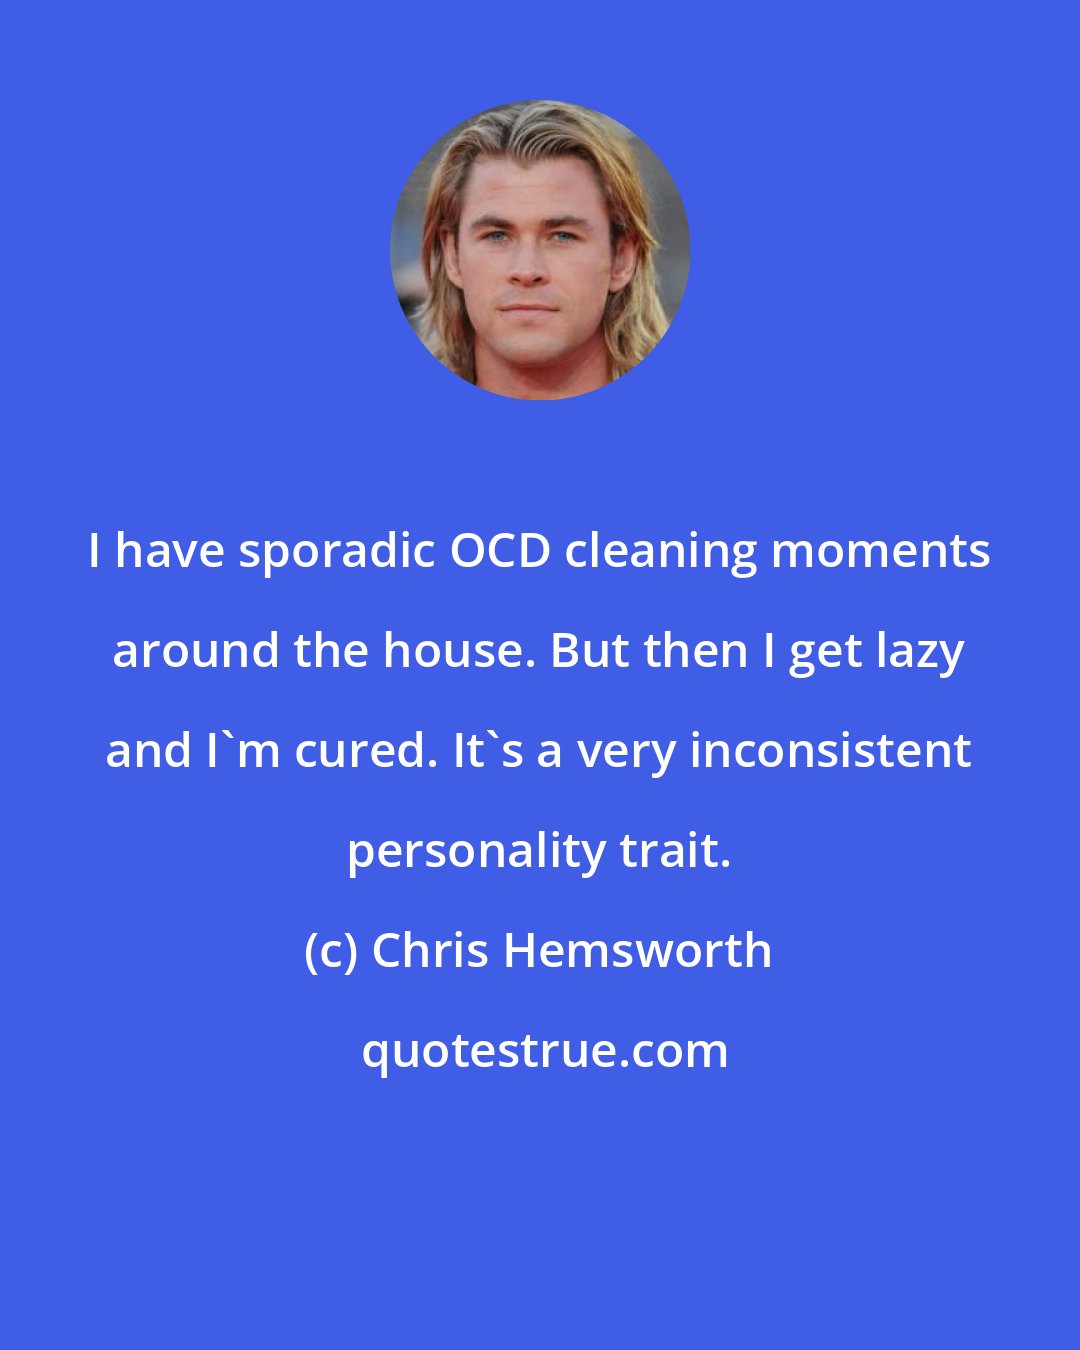 Chris Hemsworth: I have sporadic OCD cleaning moments around the house. But then I get lazy and I'm cured. It's a very inconsistent personality trait.